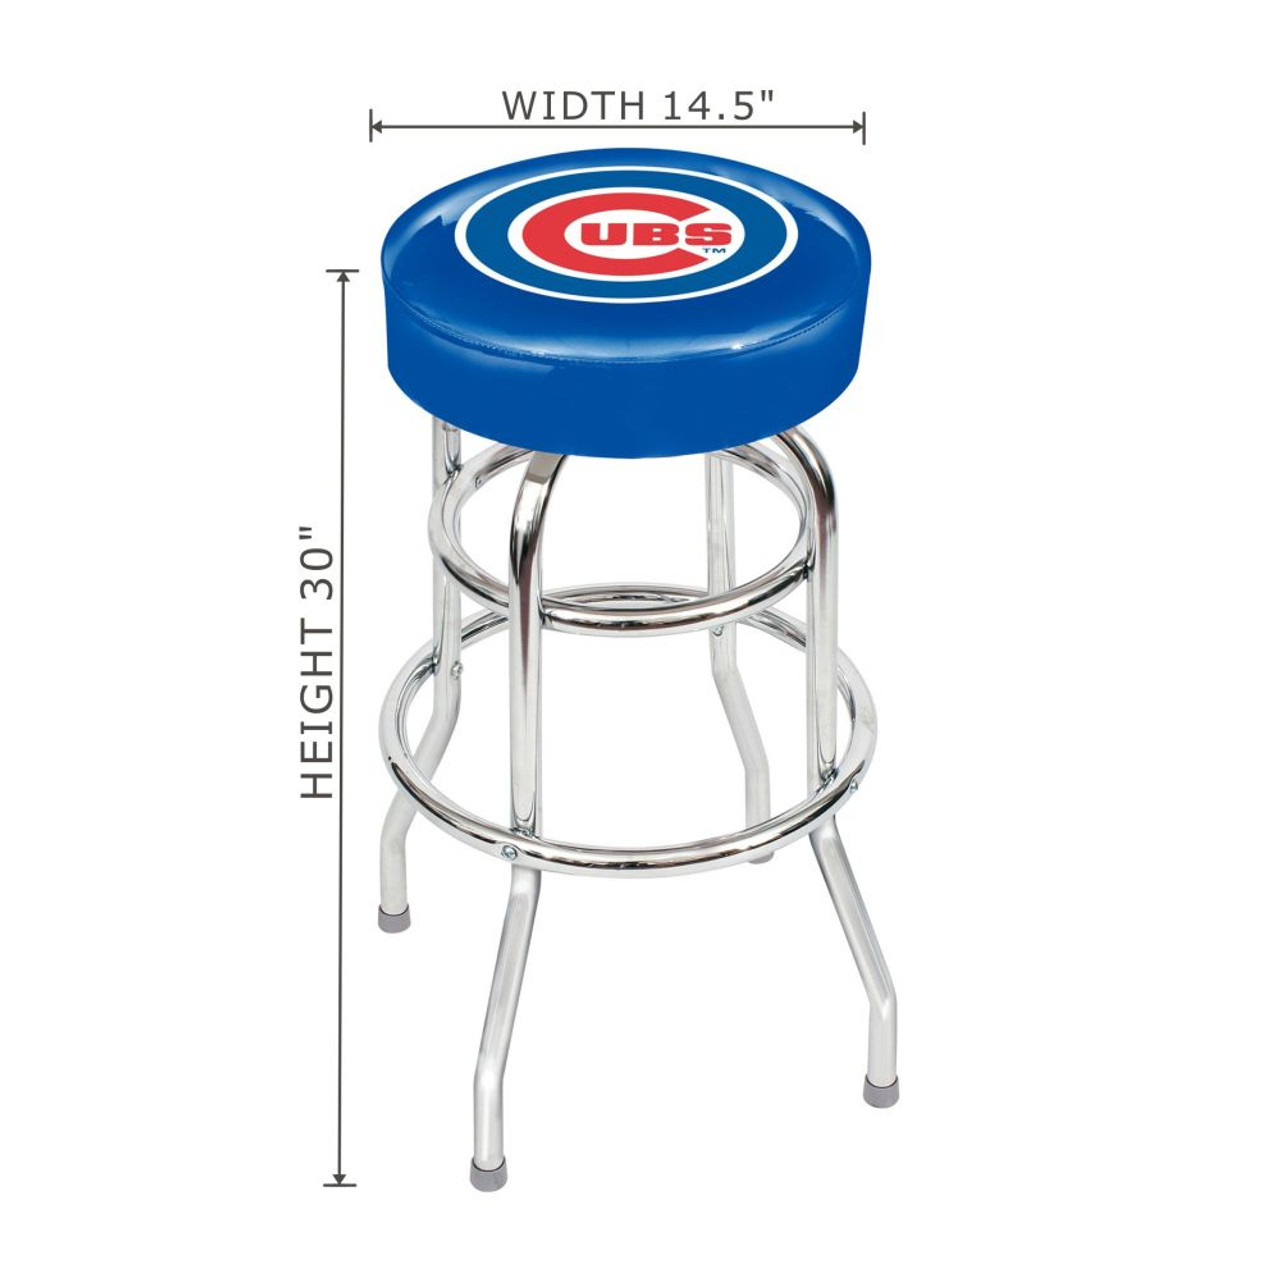 26-3005, CHI, Chicago, Cubs, 30", Chrome, Bar, Stool, MLB, Imperial, FREE SHIPPING, 720802630051